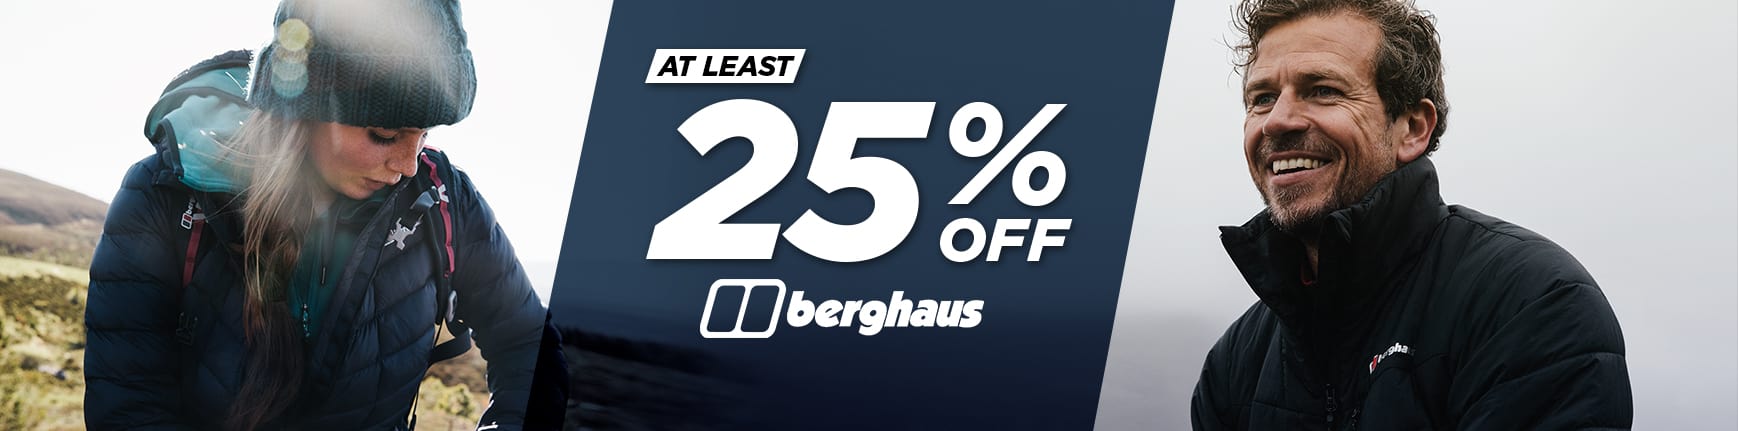 Millet Sports: 25% off Berghaus clothing